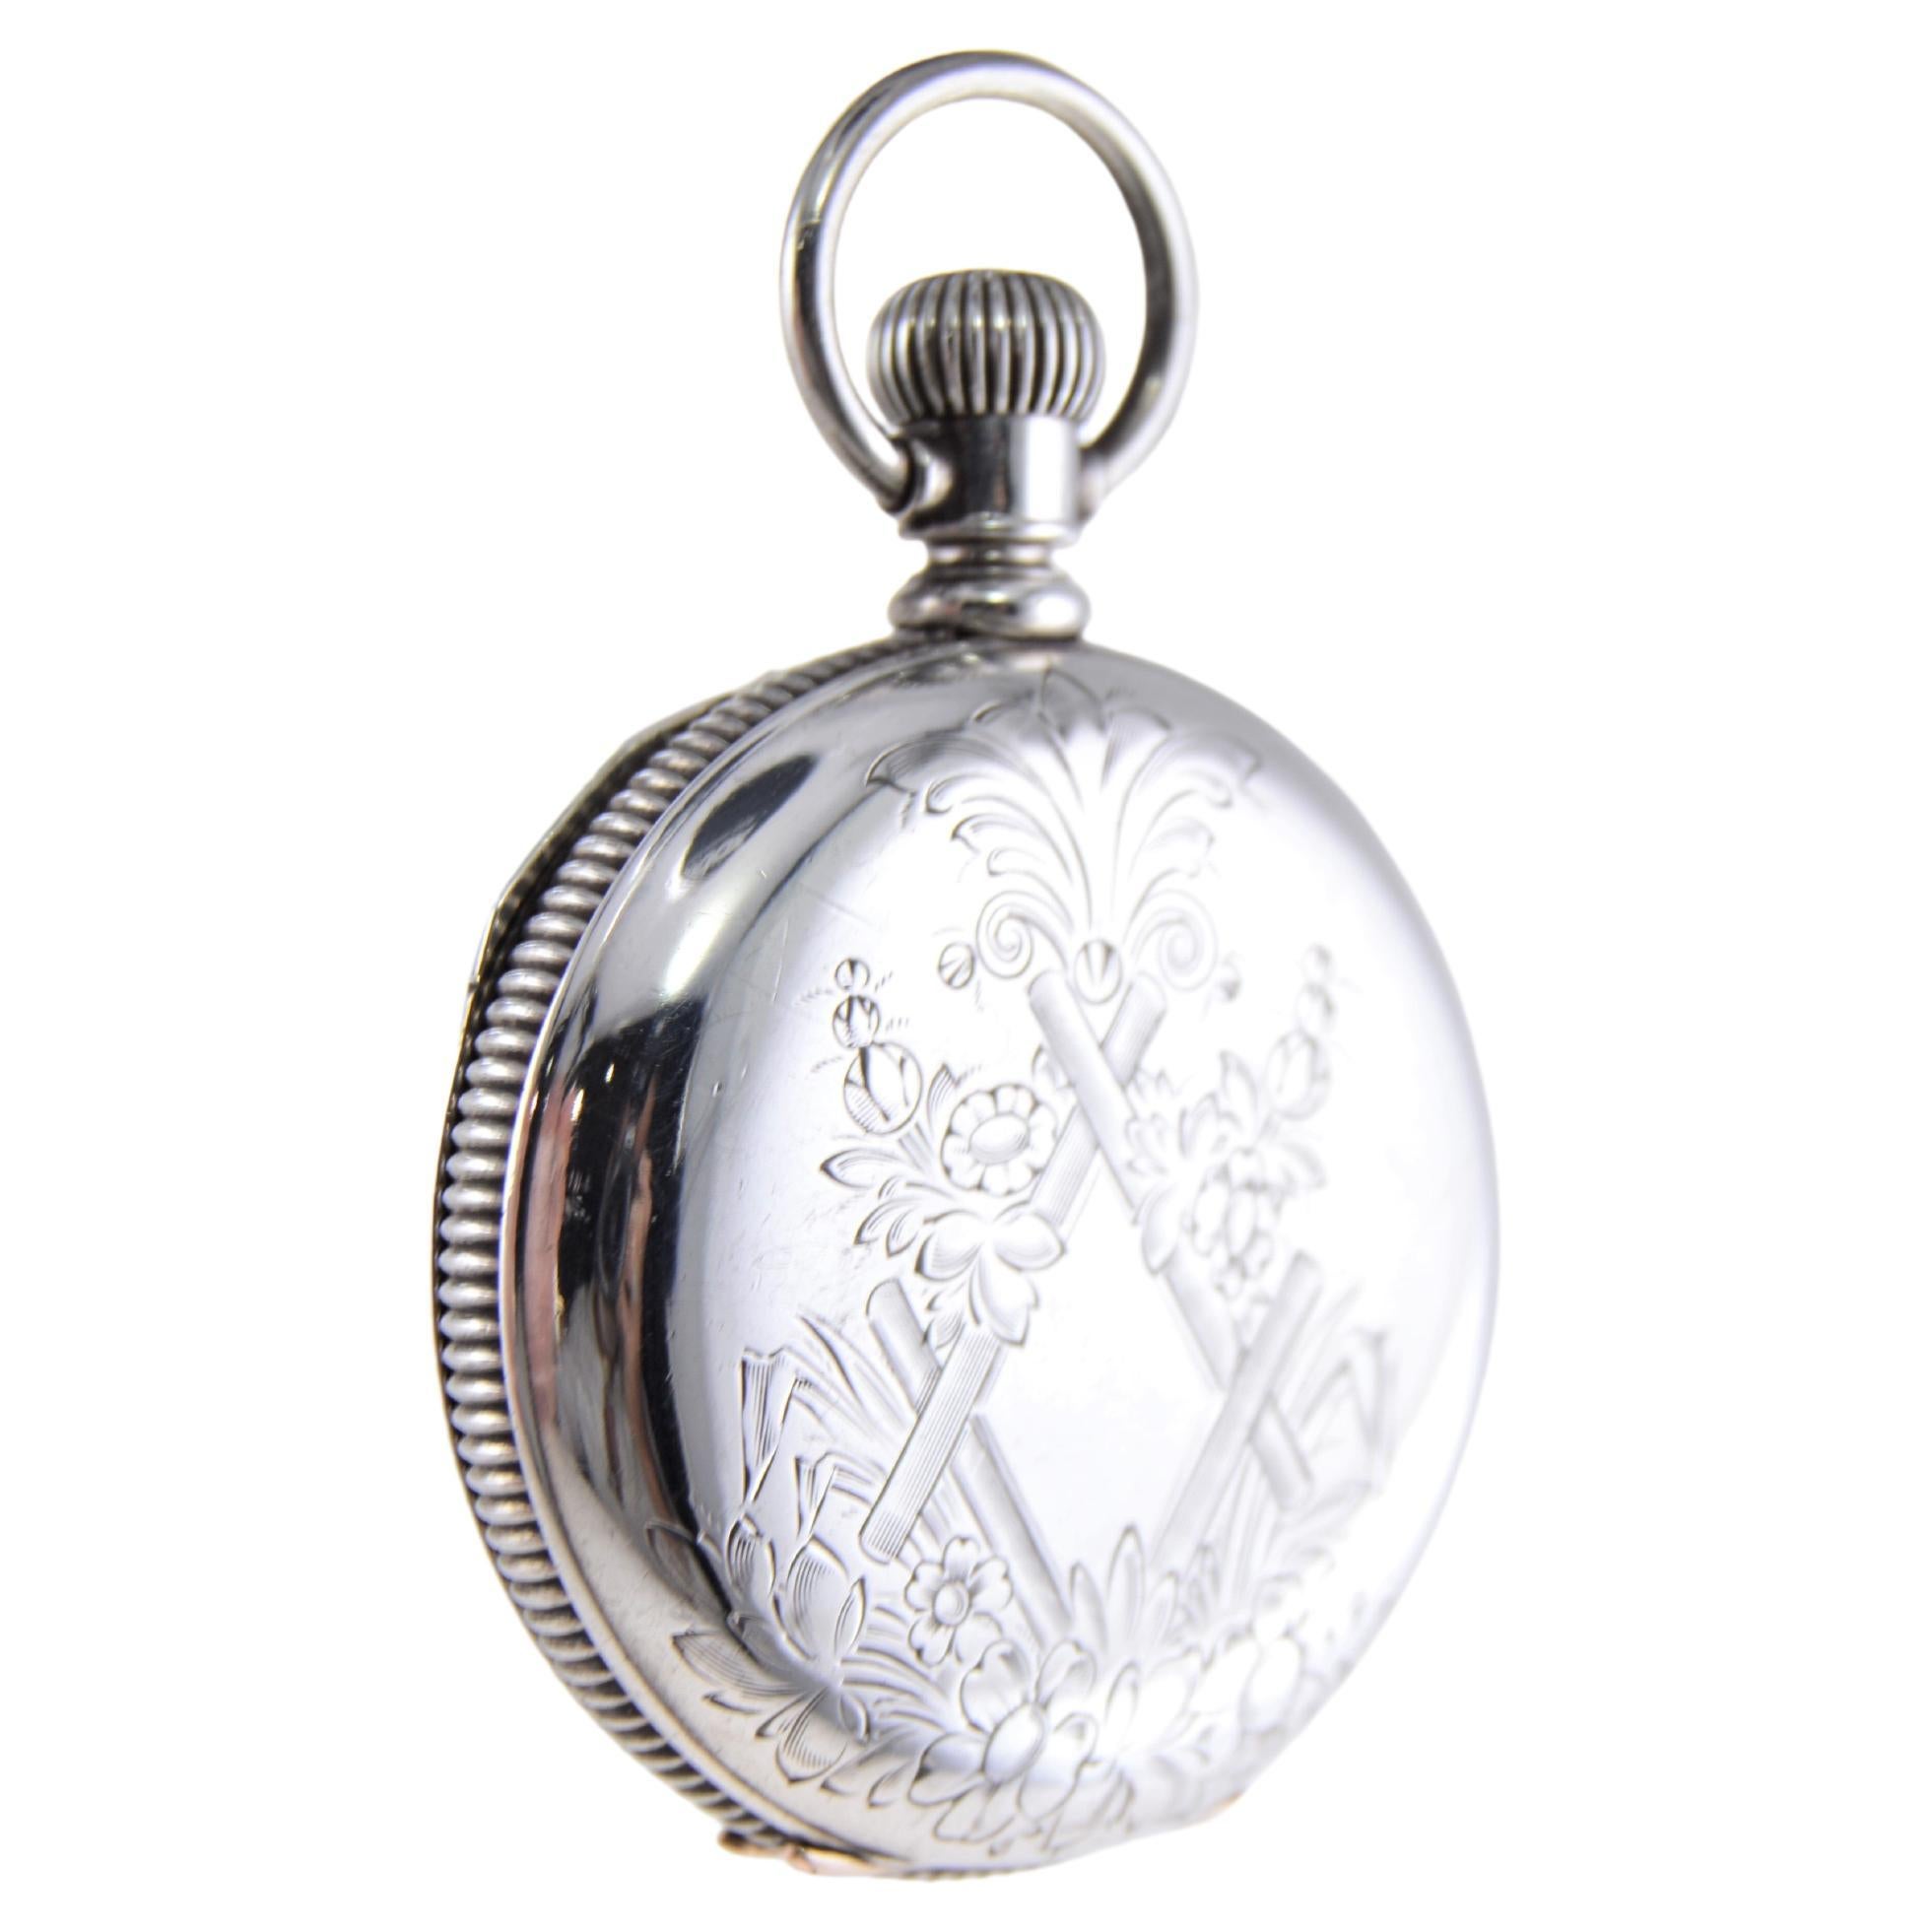 Illinois Silver Hunters Case Pocket Watch from 1893 with Pocket Watch Chain  For Sale 3